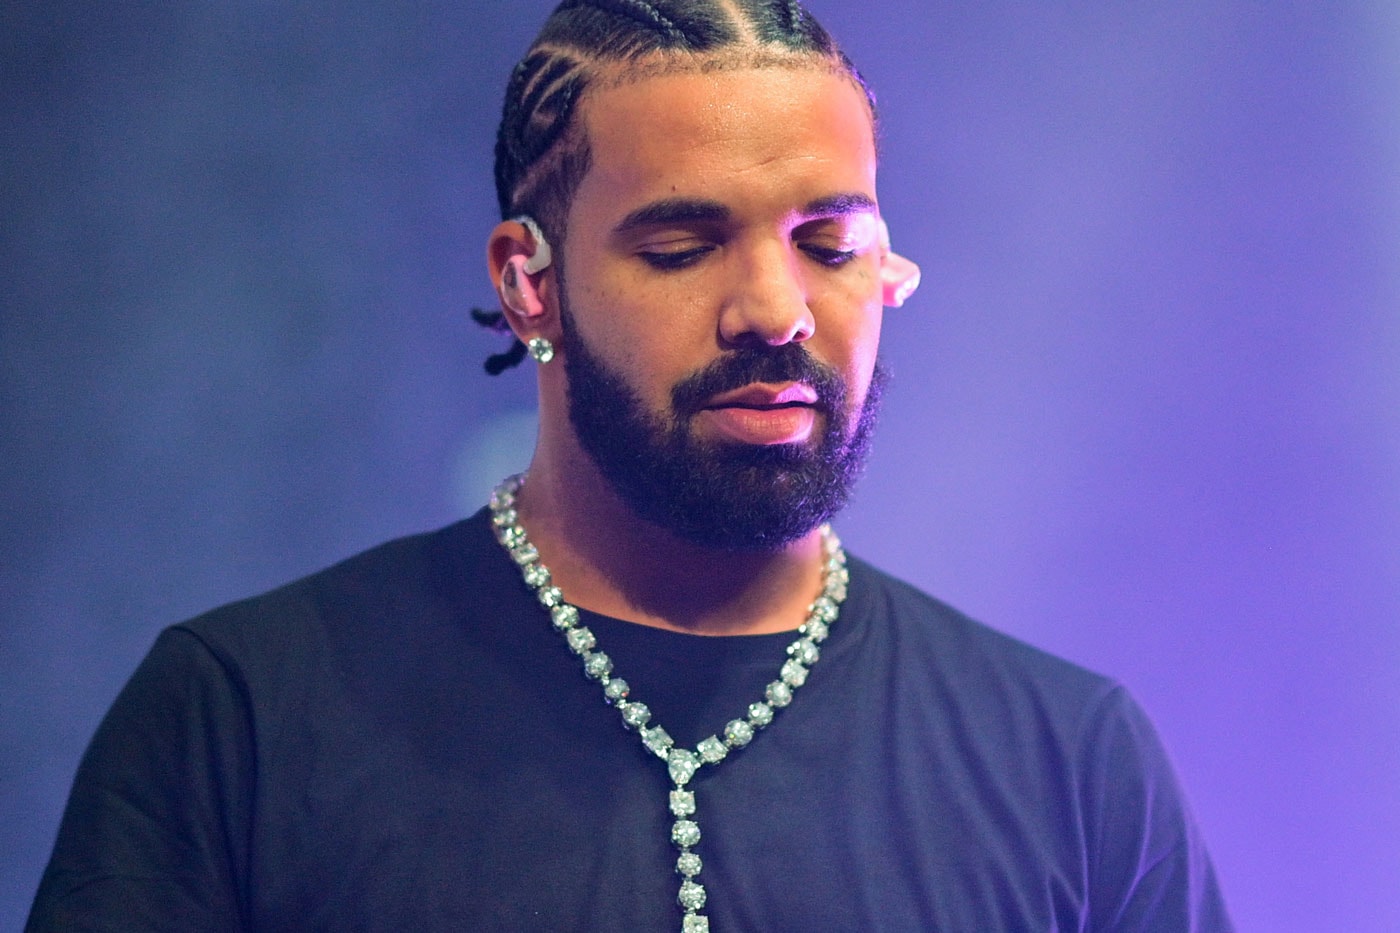 A Bizarre Error Prevented Drake's "Hotline Bling" From Receiving a Grammy Nomination